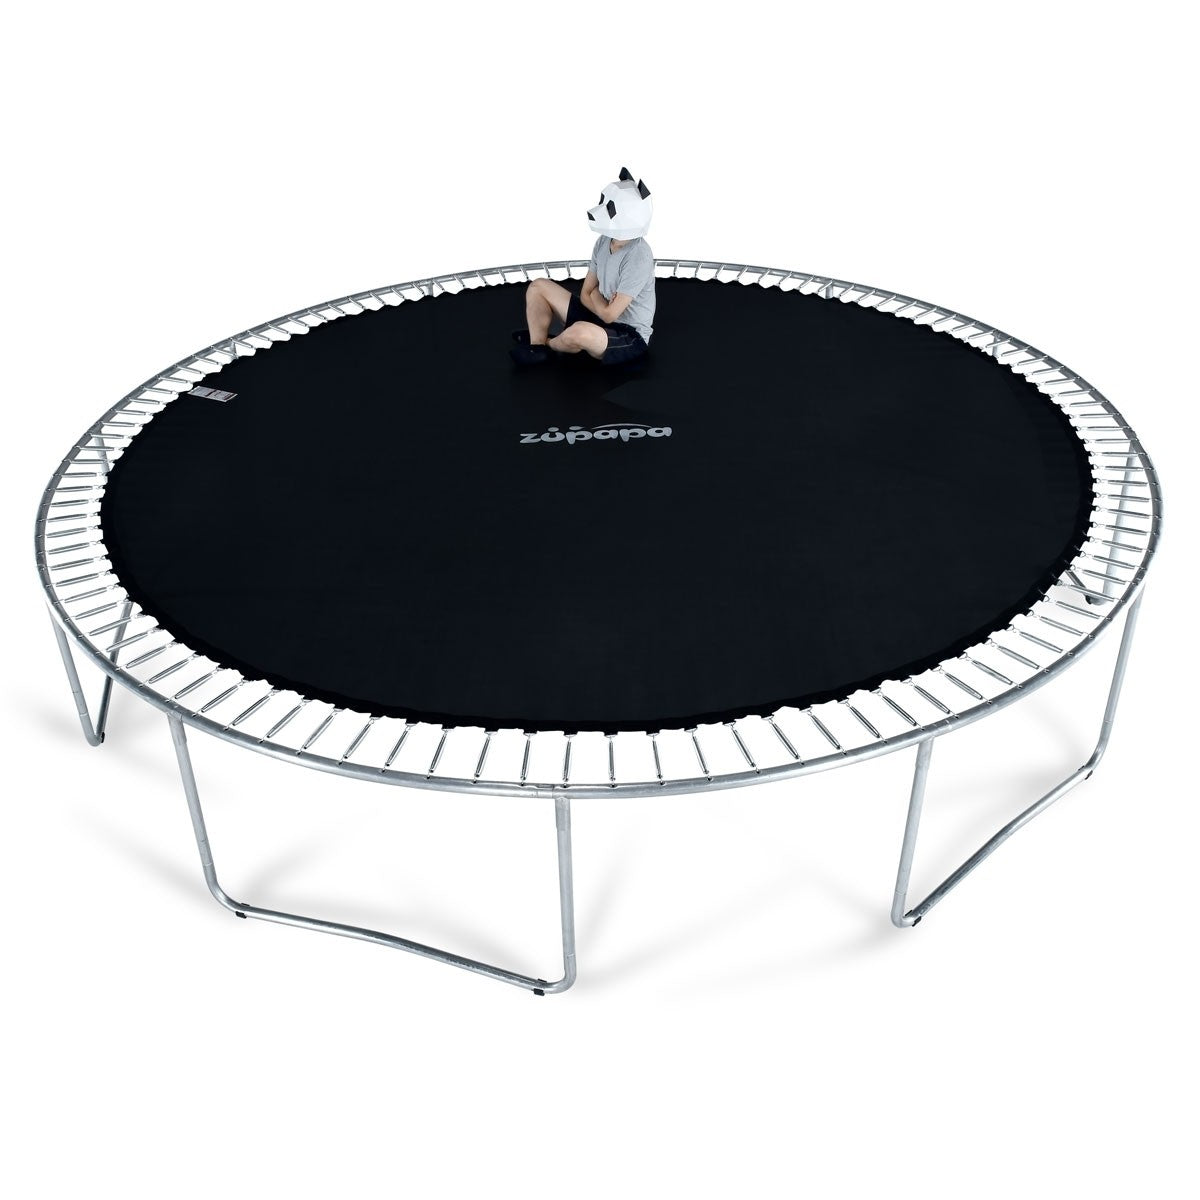 10 ft trampoline replacement jumping mat